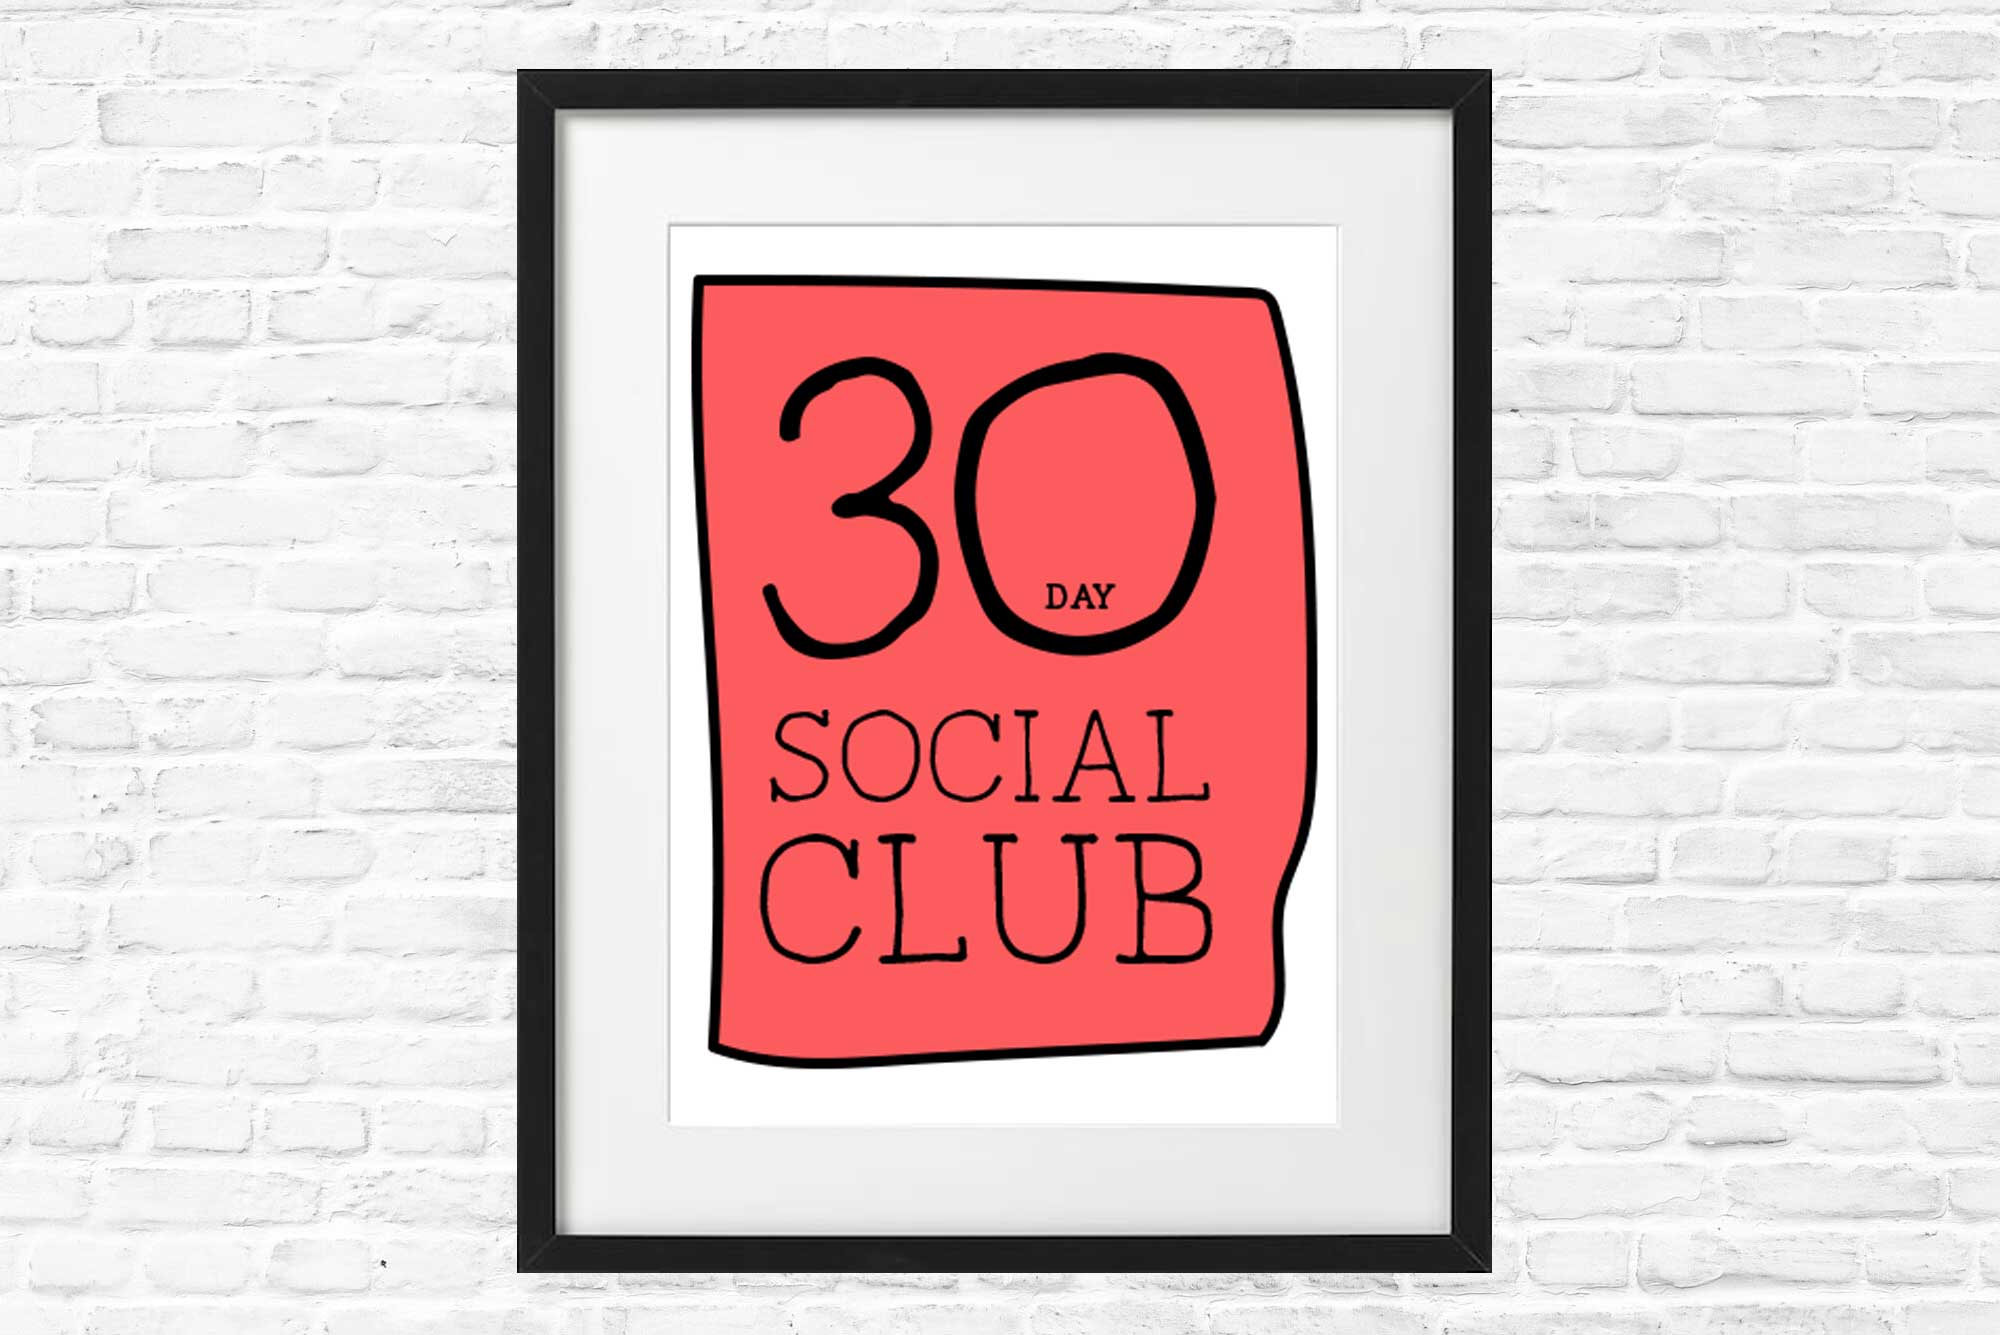 30 day social club picture in a picture frame